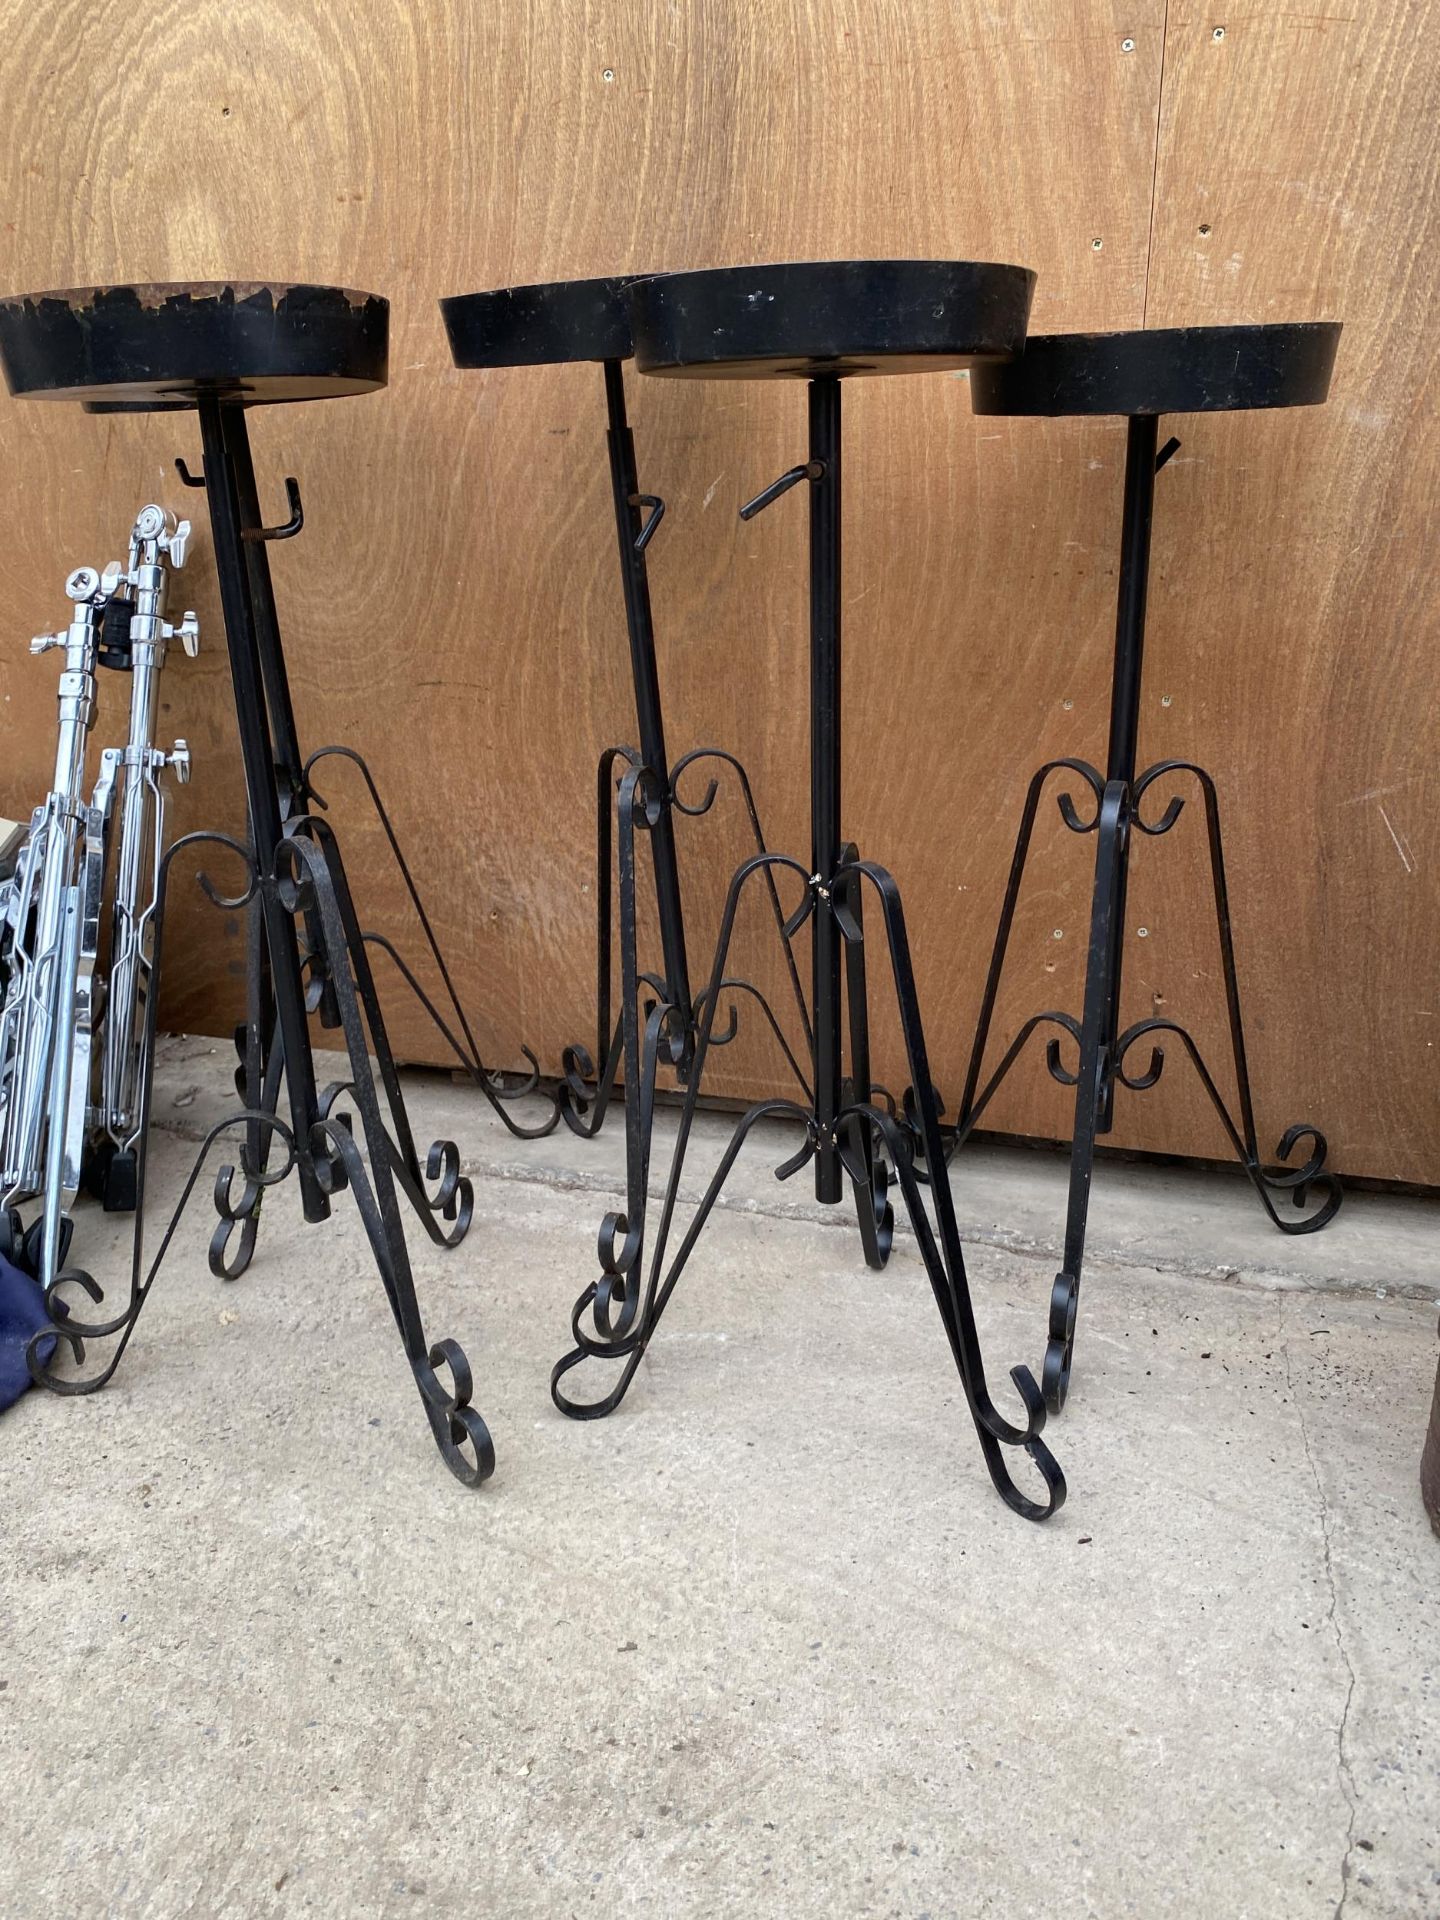 FIVE BLACK PAINTED METAL PLANT STANDS WITH TRIPOD BASE (H:74CM) - Image 2 of 4